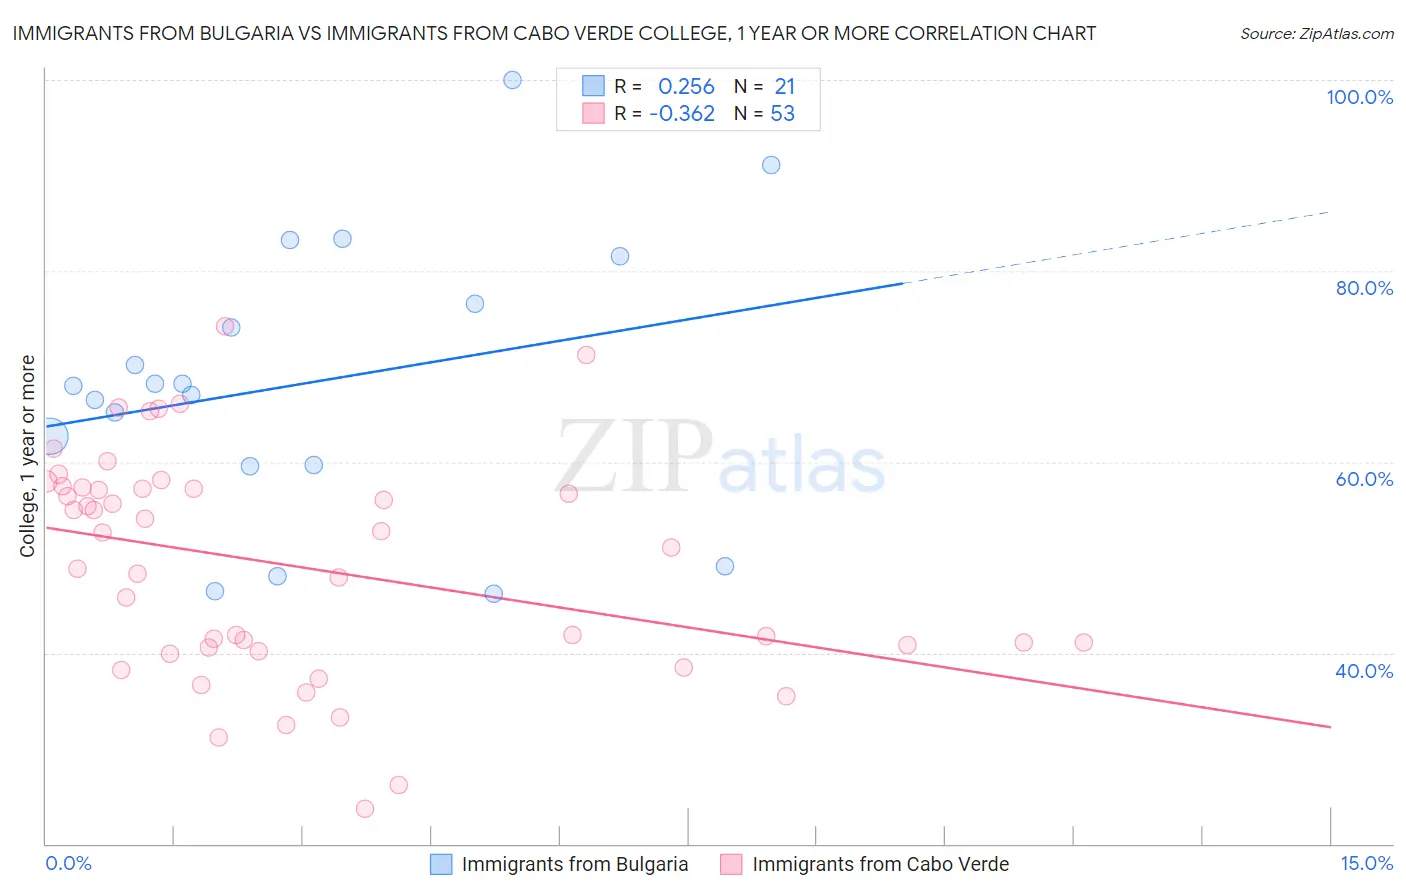 Immigrants from Bulgaria vs Immigrants from Cabo Verde College, 1 year or more